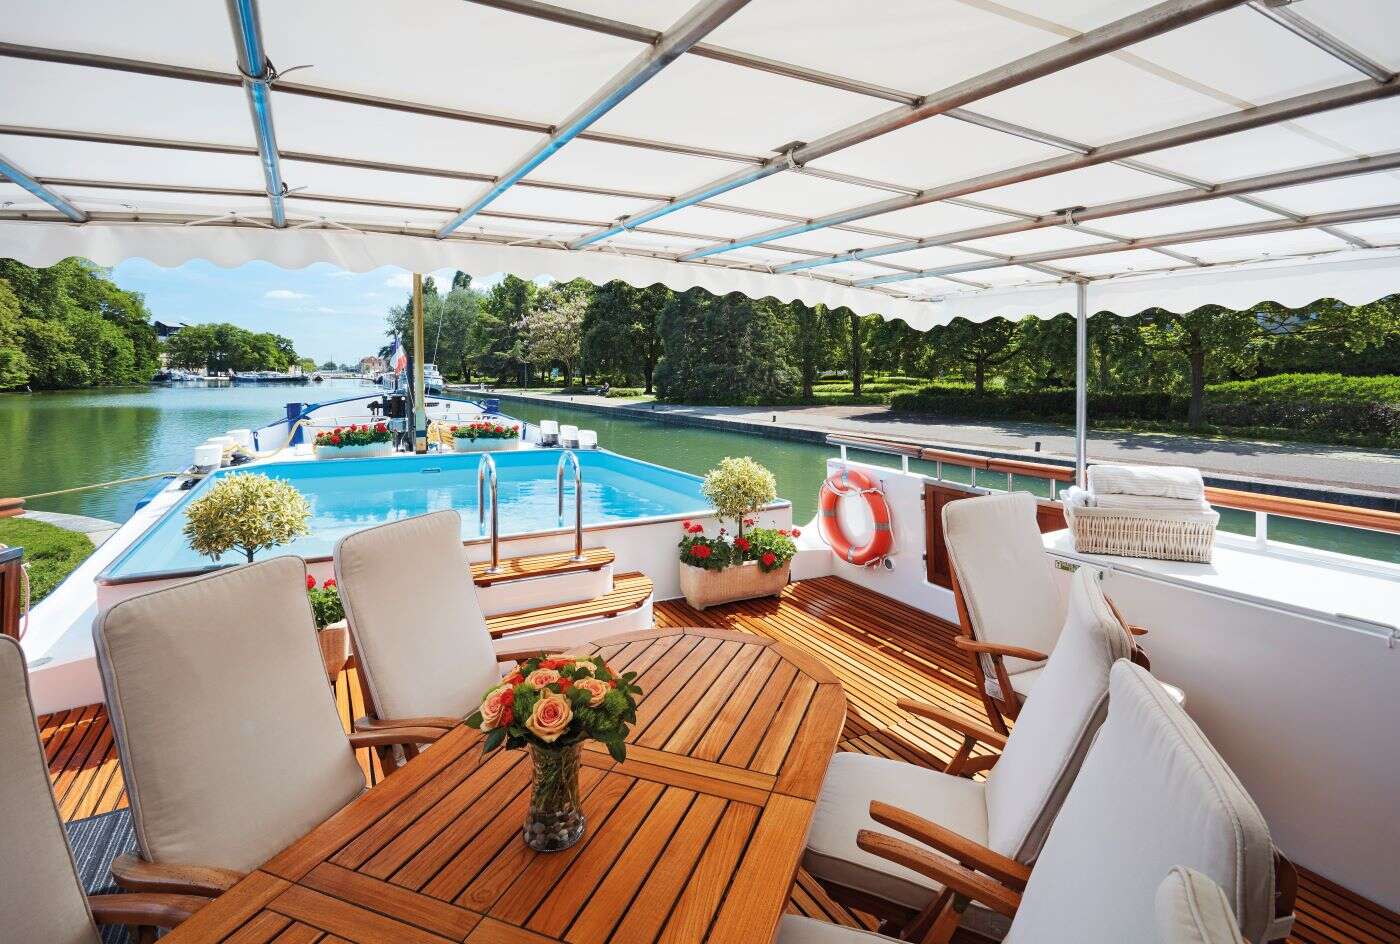 Deck of Belmond Barge featuring dining table and pool